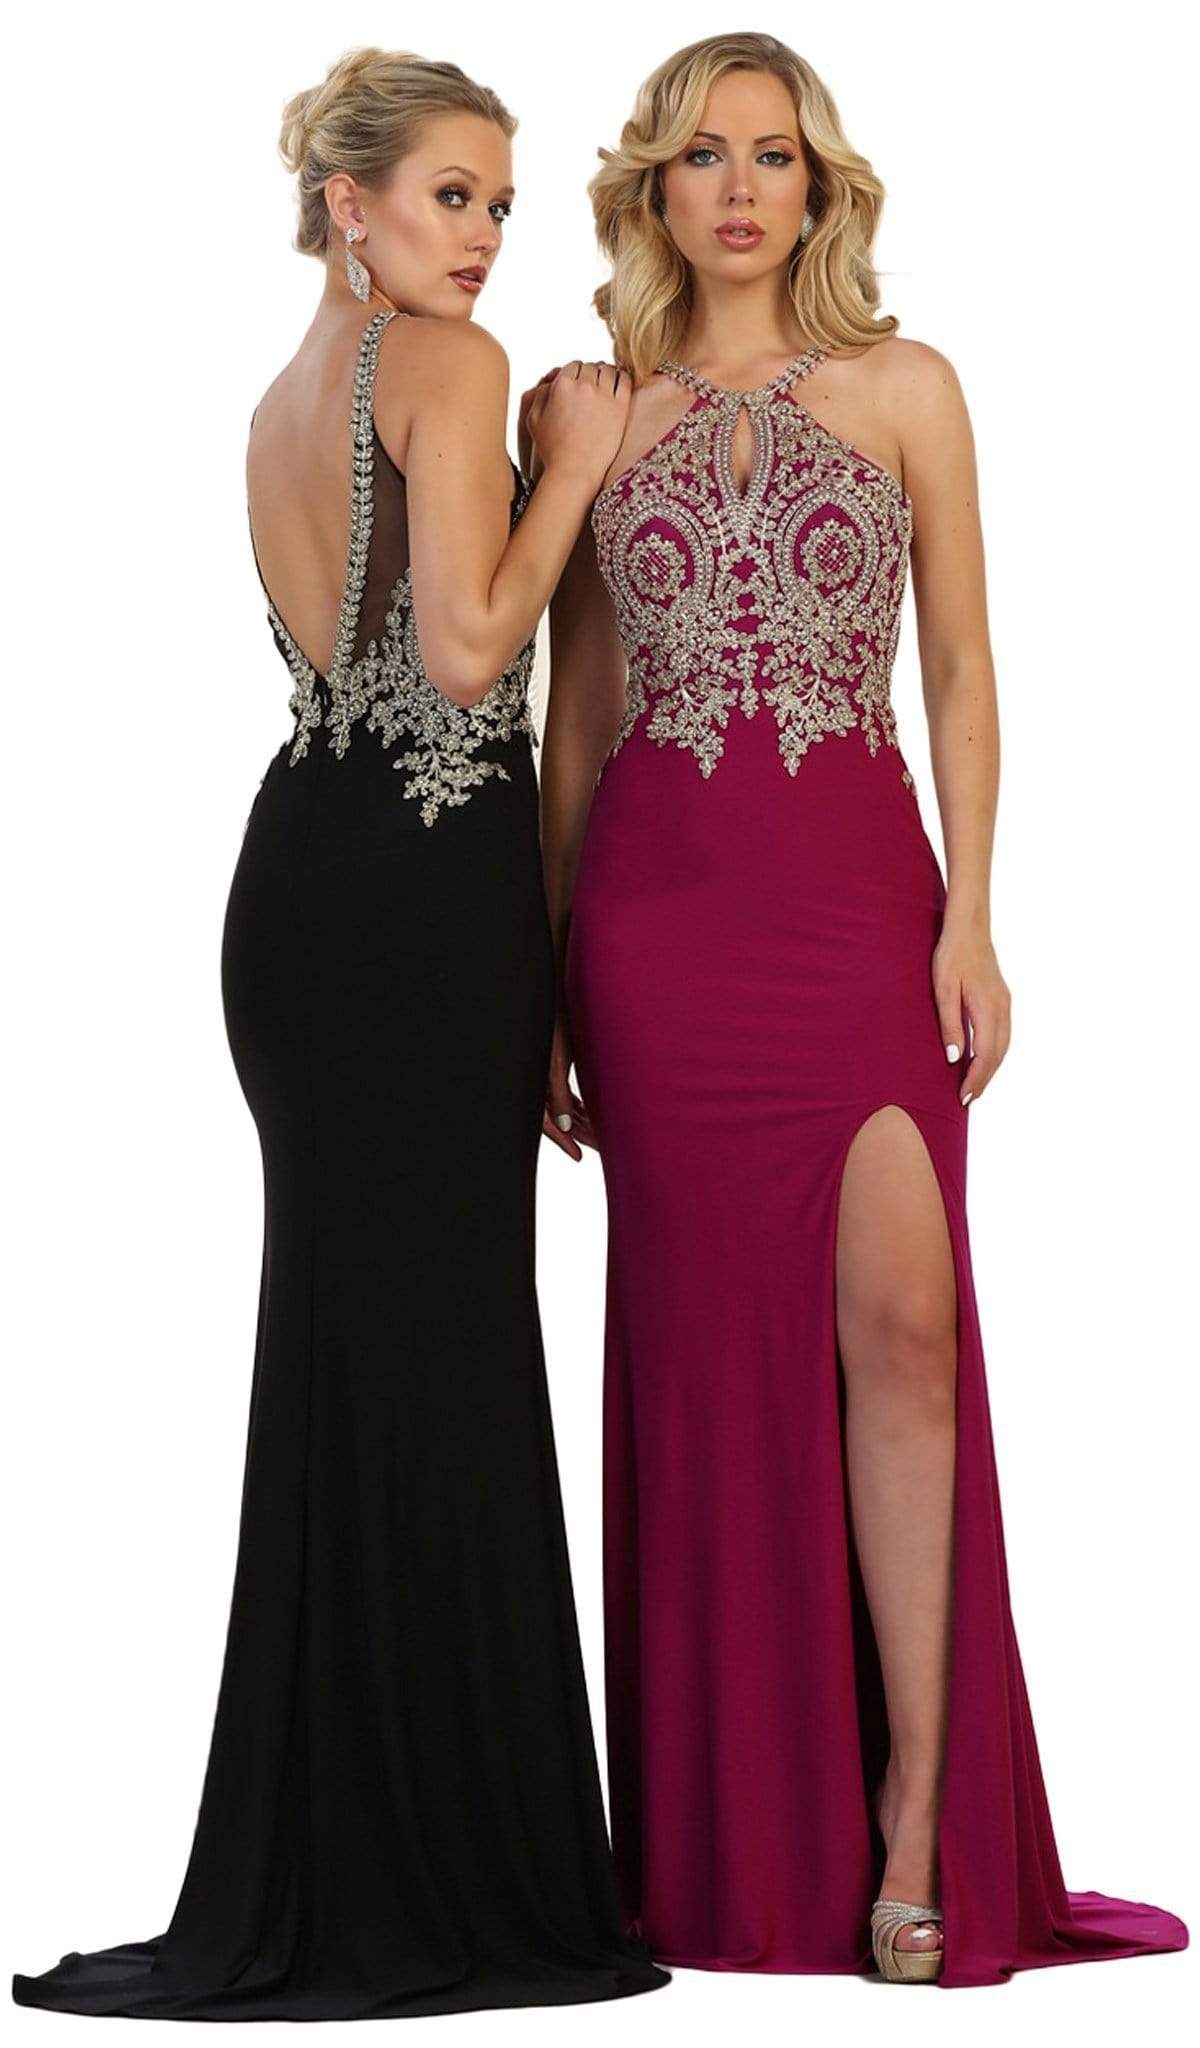 May Queen - Embellished Halter Sheath Evening Gown Special Occasion Dress